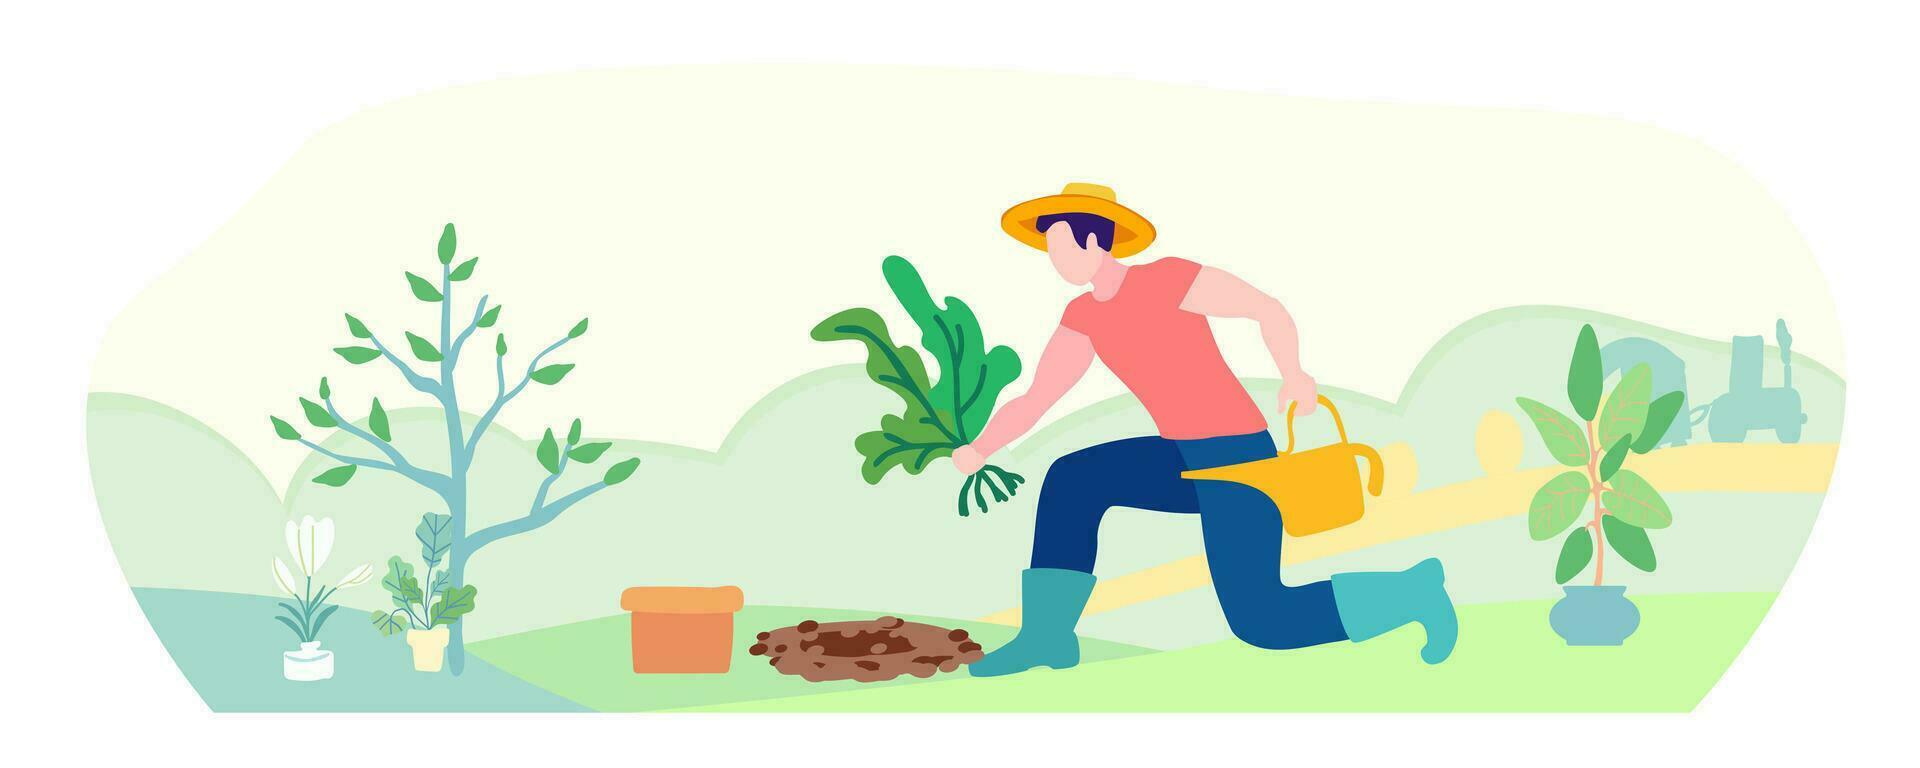 A gardener in a straw hat plants a plant. Hand drawn, vector illustration